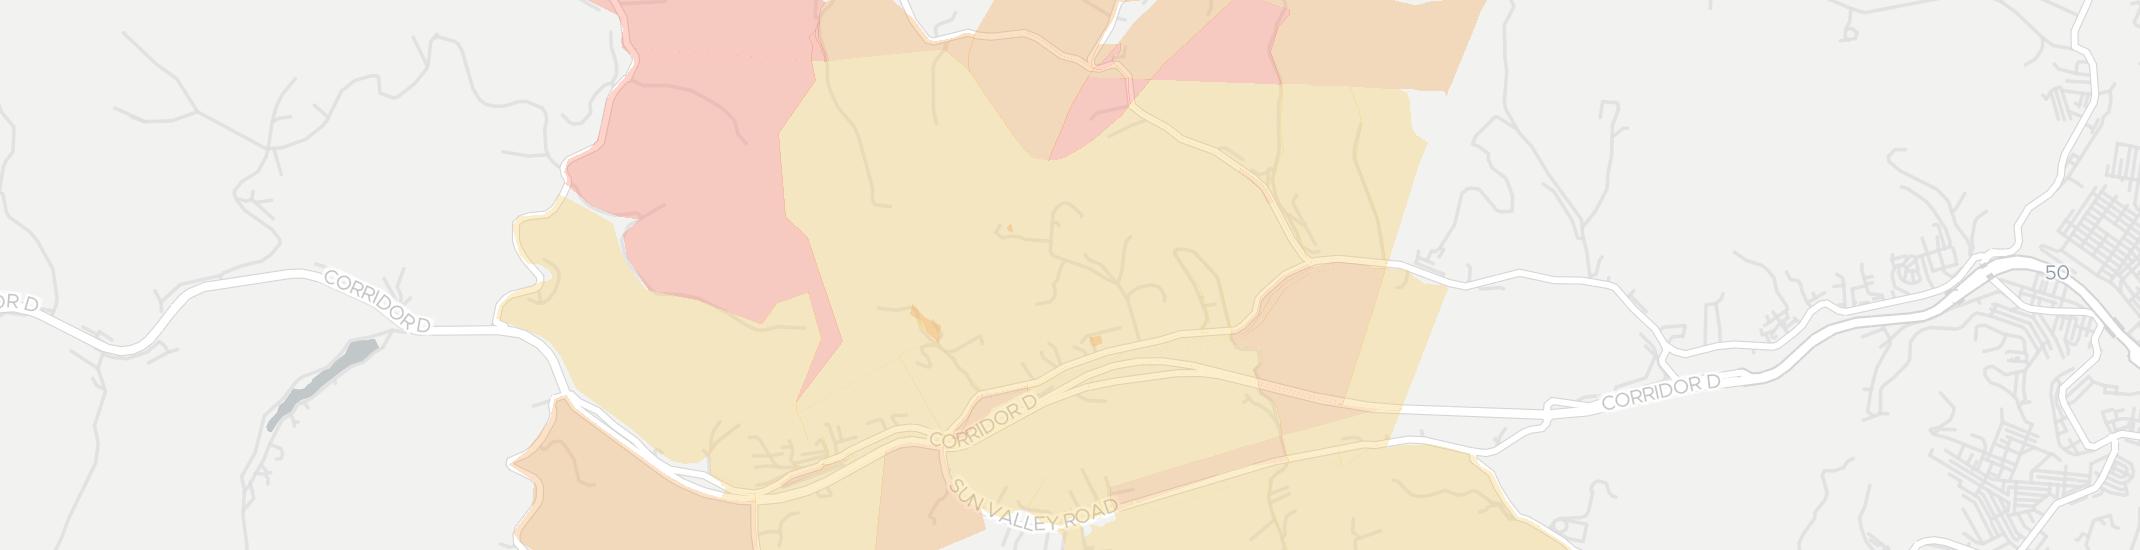 Reynoldsville Internet Competition Map. Click for interactive map.